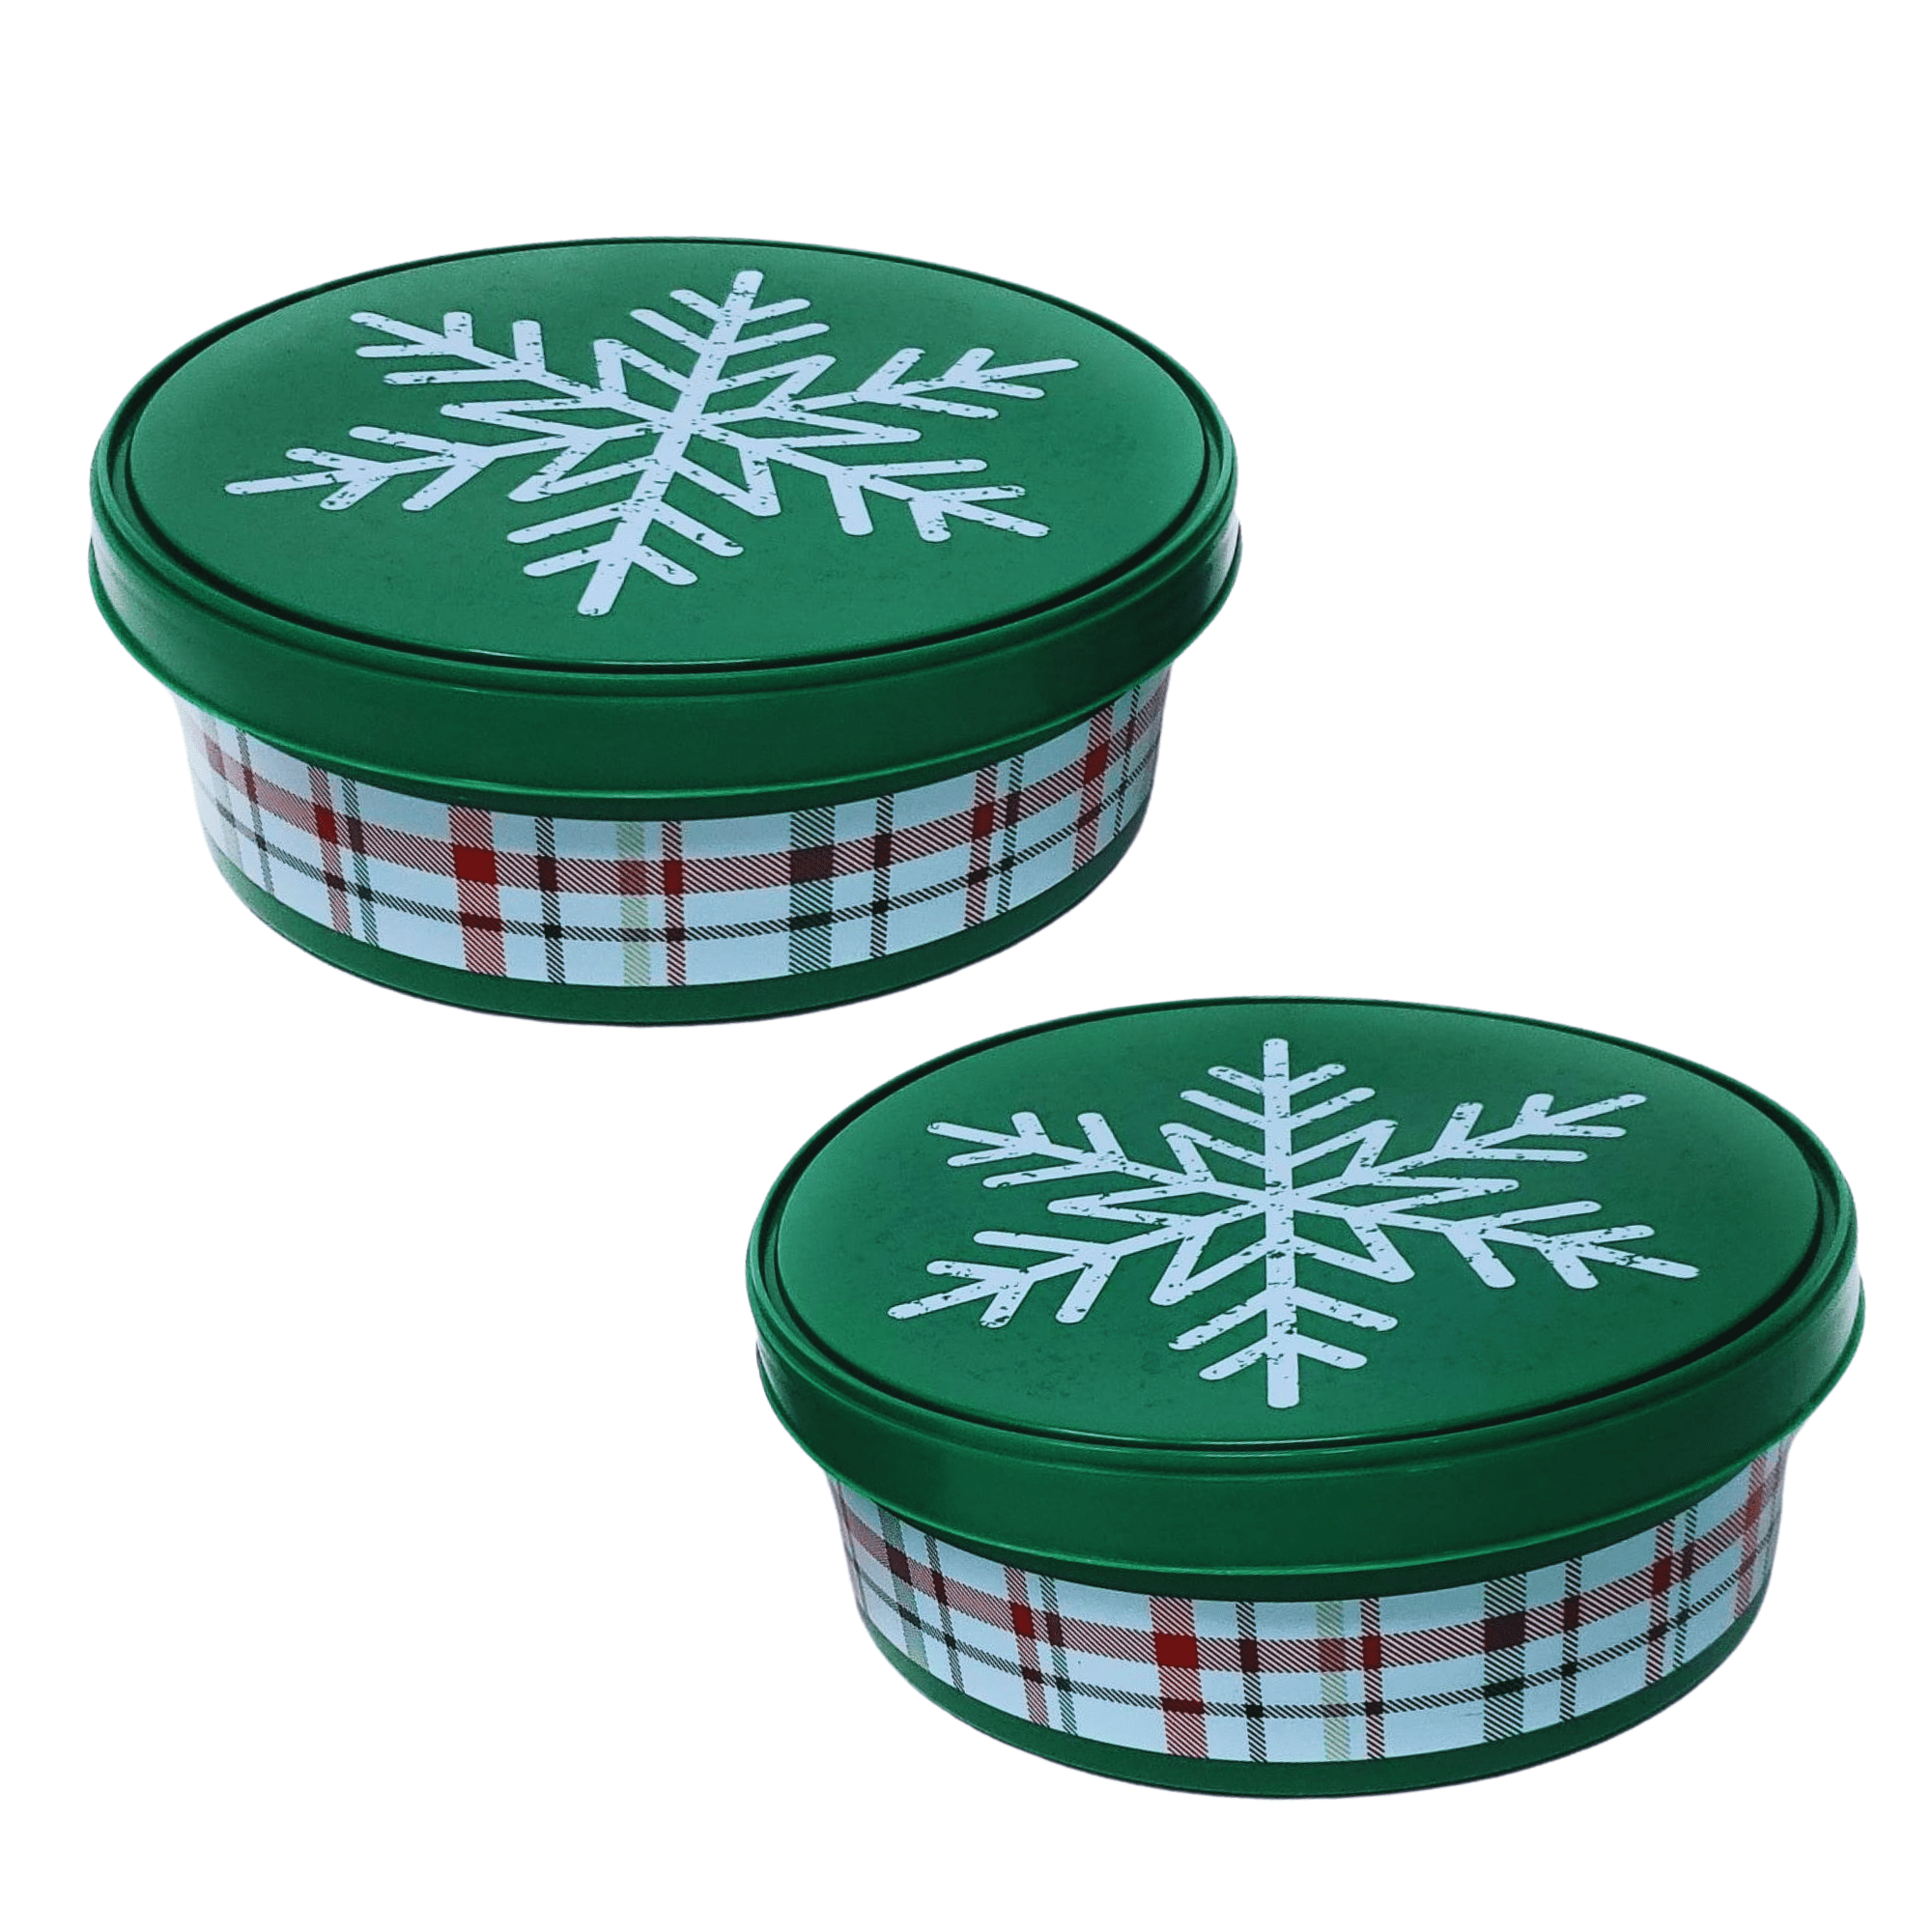 American Maid, Kitchen, Christmas Cookie 3 Pk Plastic Storage Containers  W Lids Set Of 4 Nwt